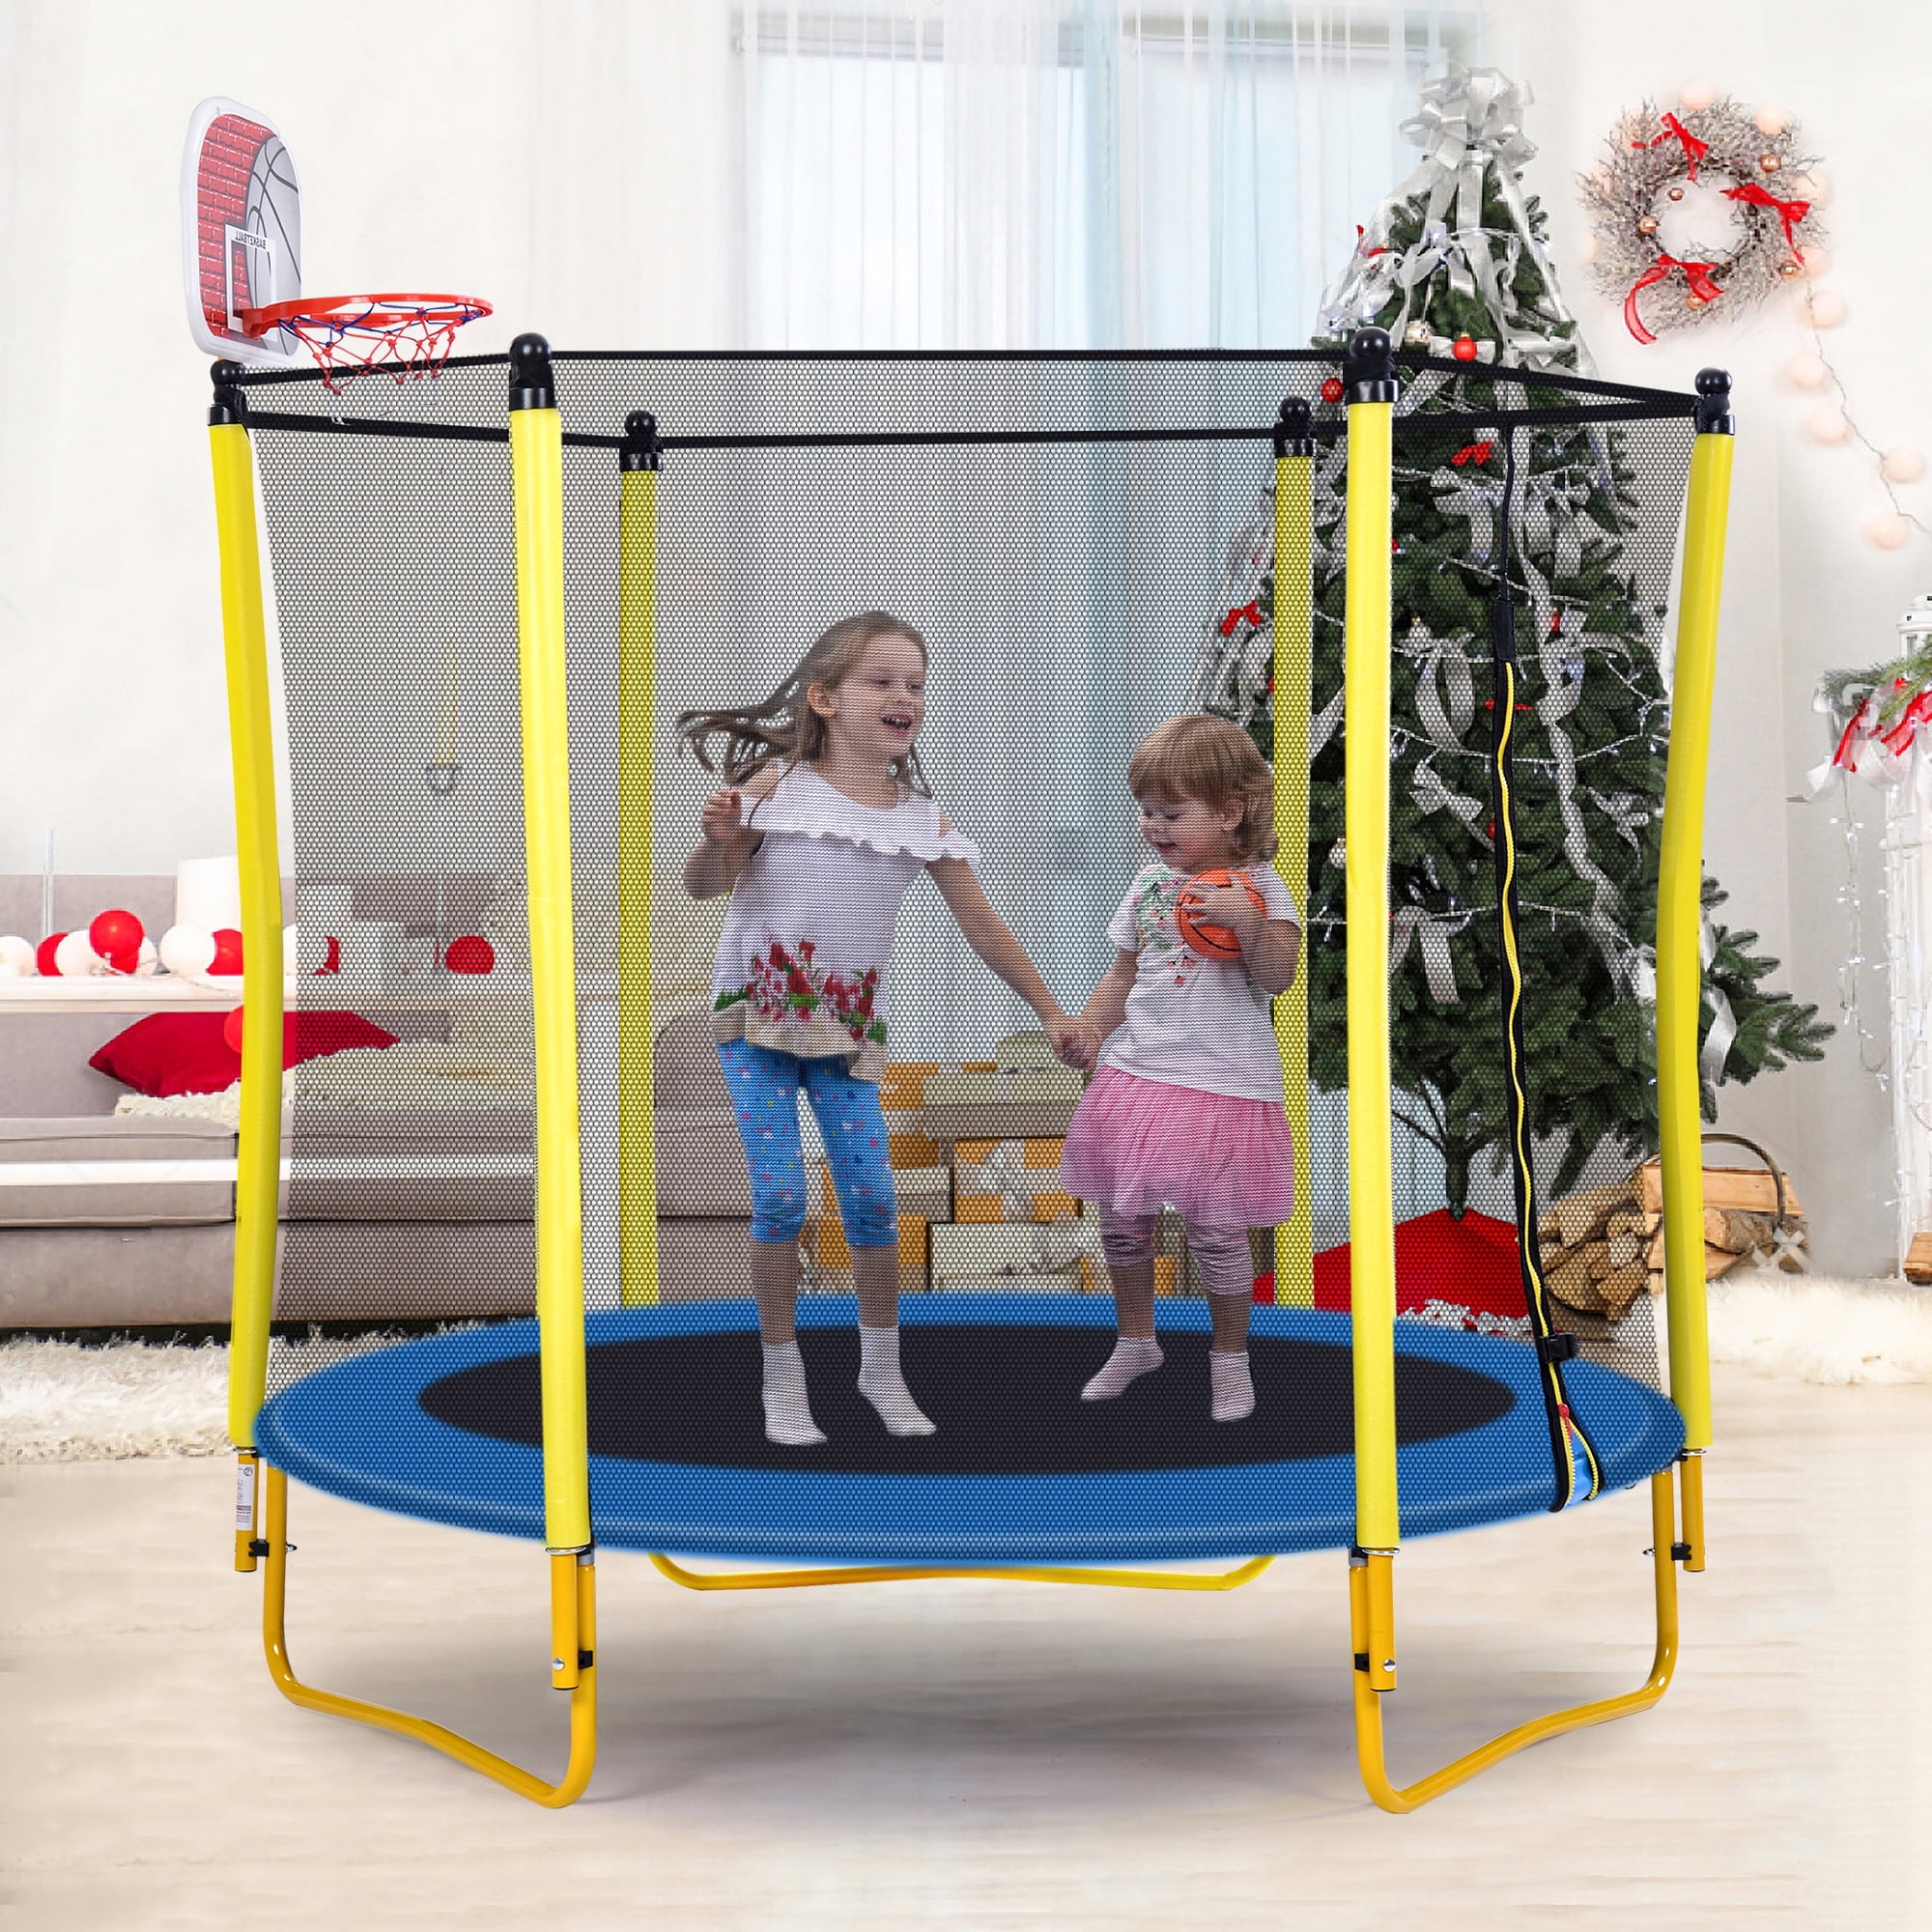 with Enclosure Jump Kids 5 Foot Trampoline Indoor/Outdoo Bounce 